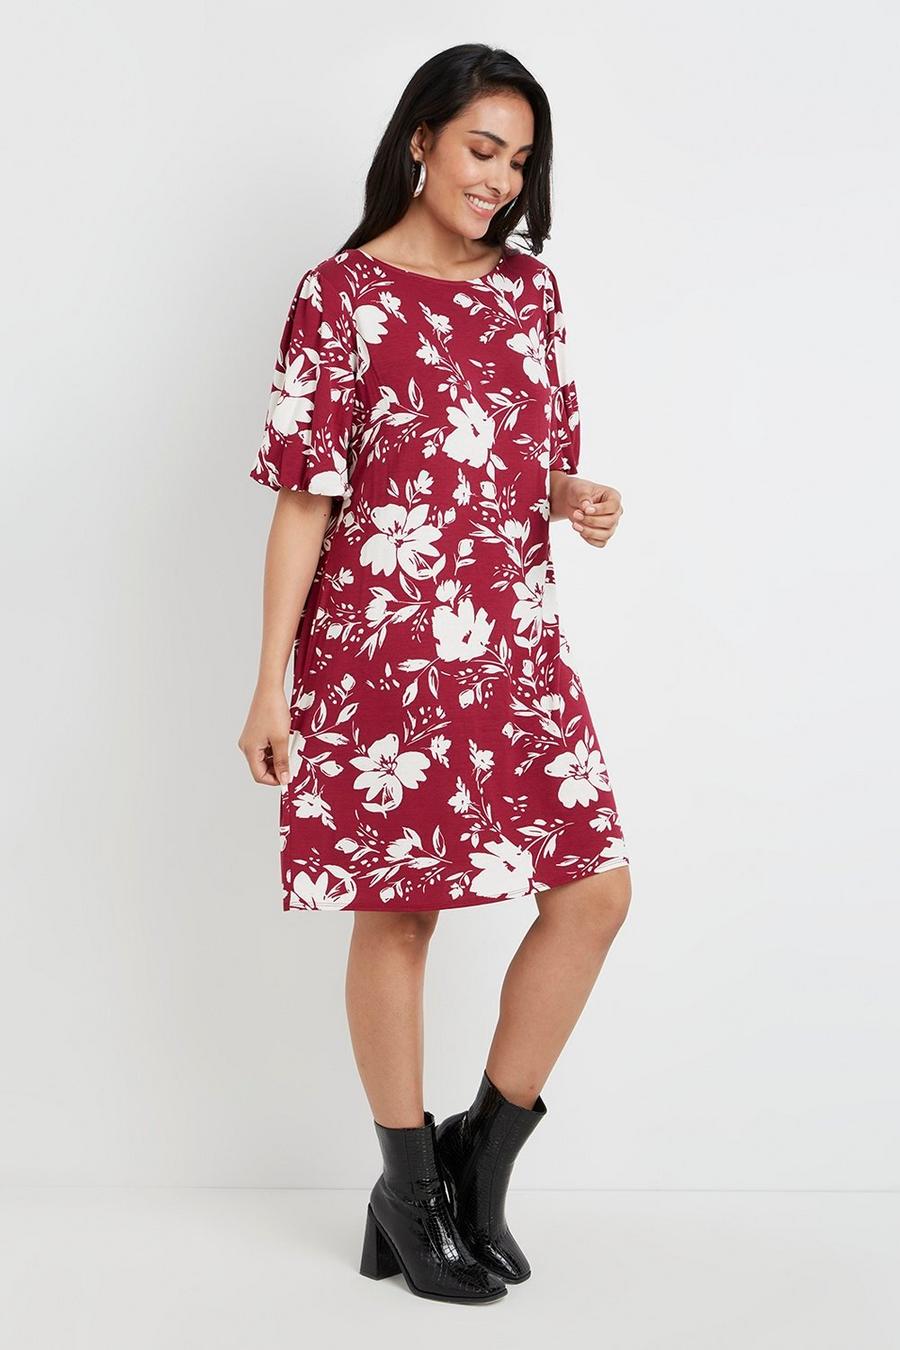 Petite Red Floral Puff Sleeve Shift Dress